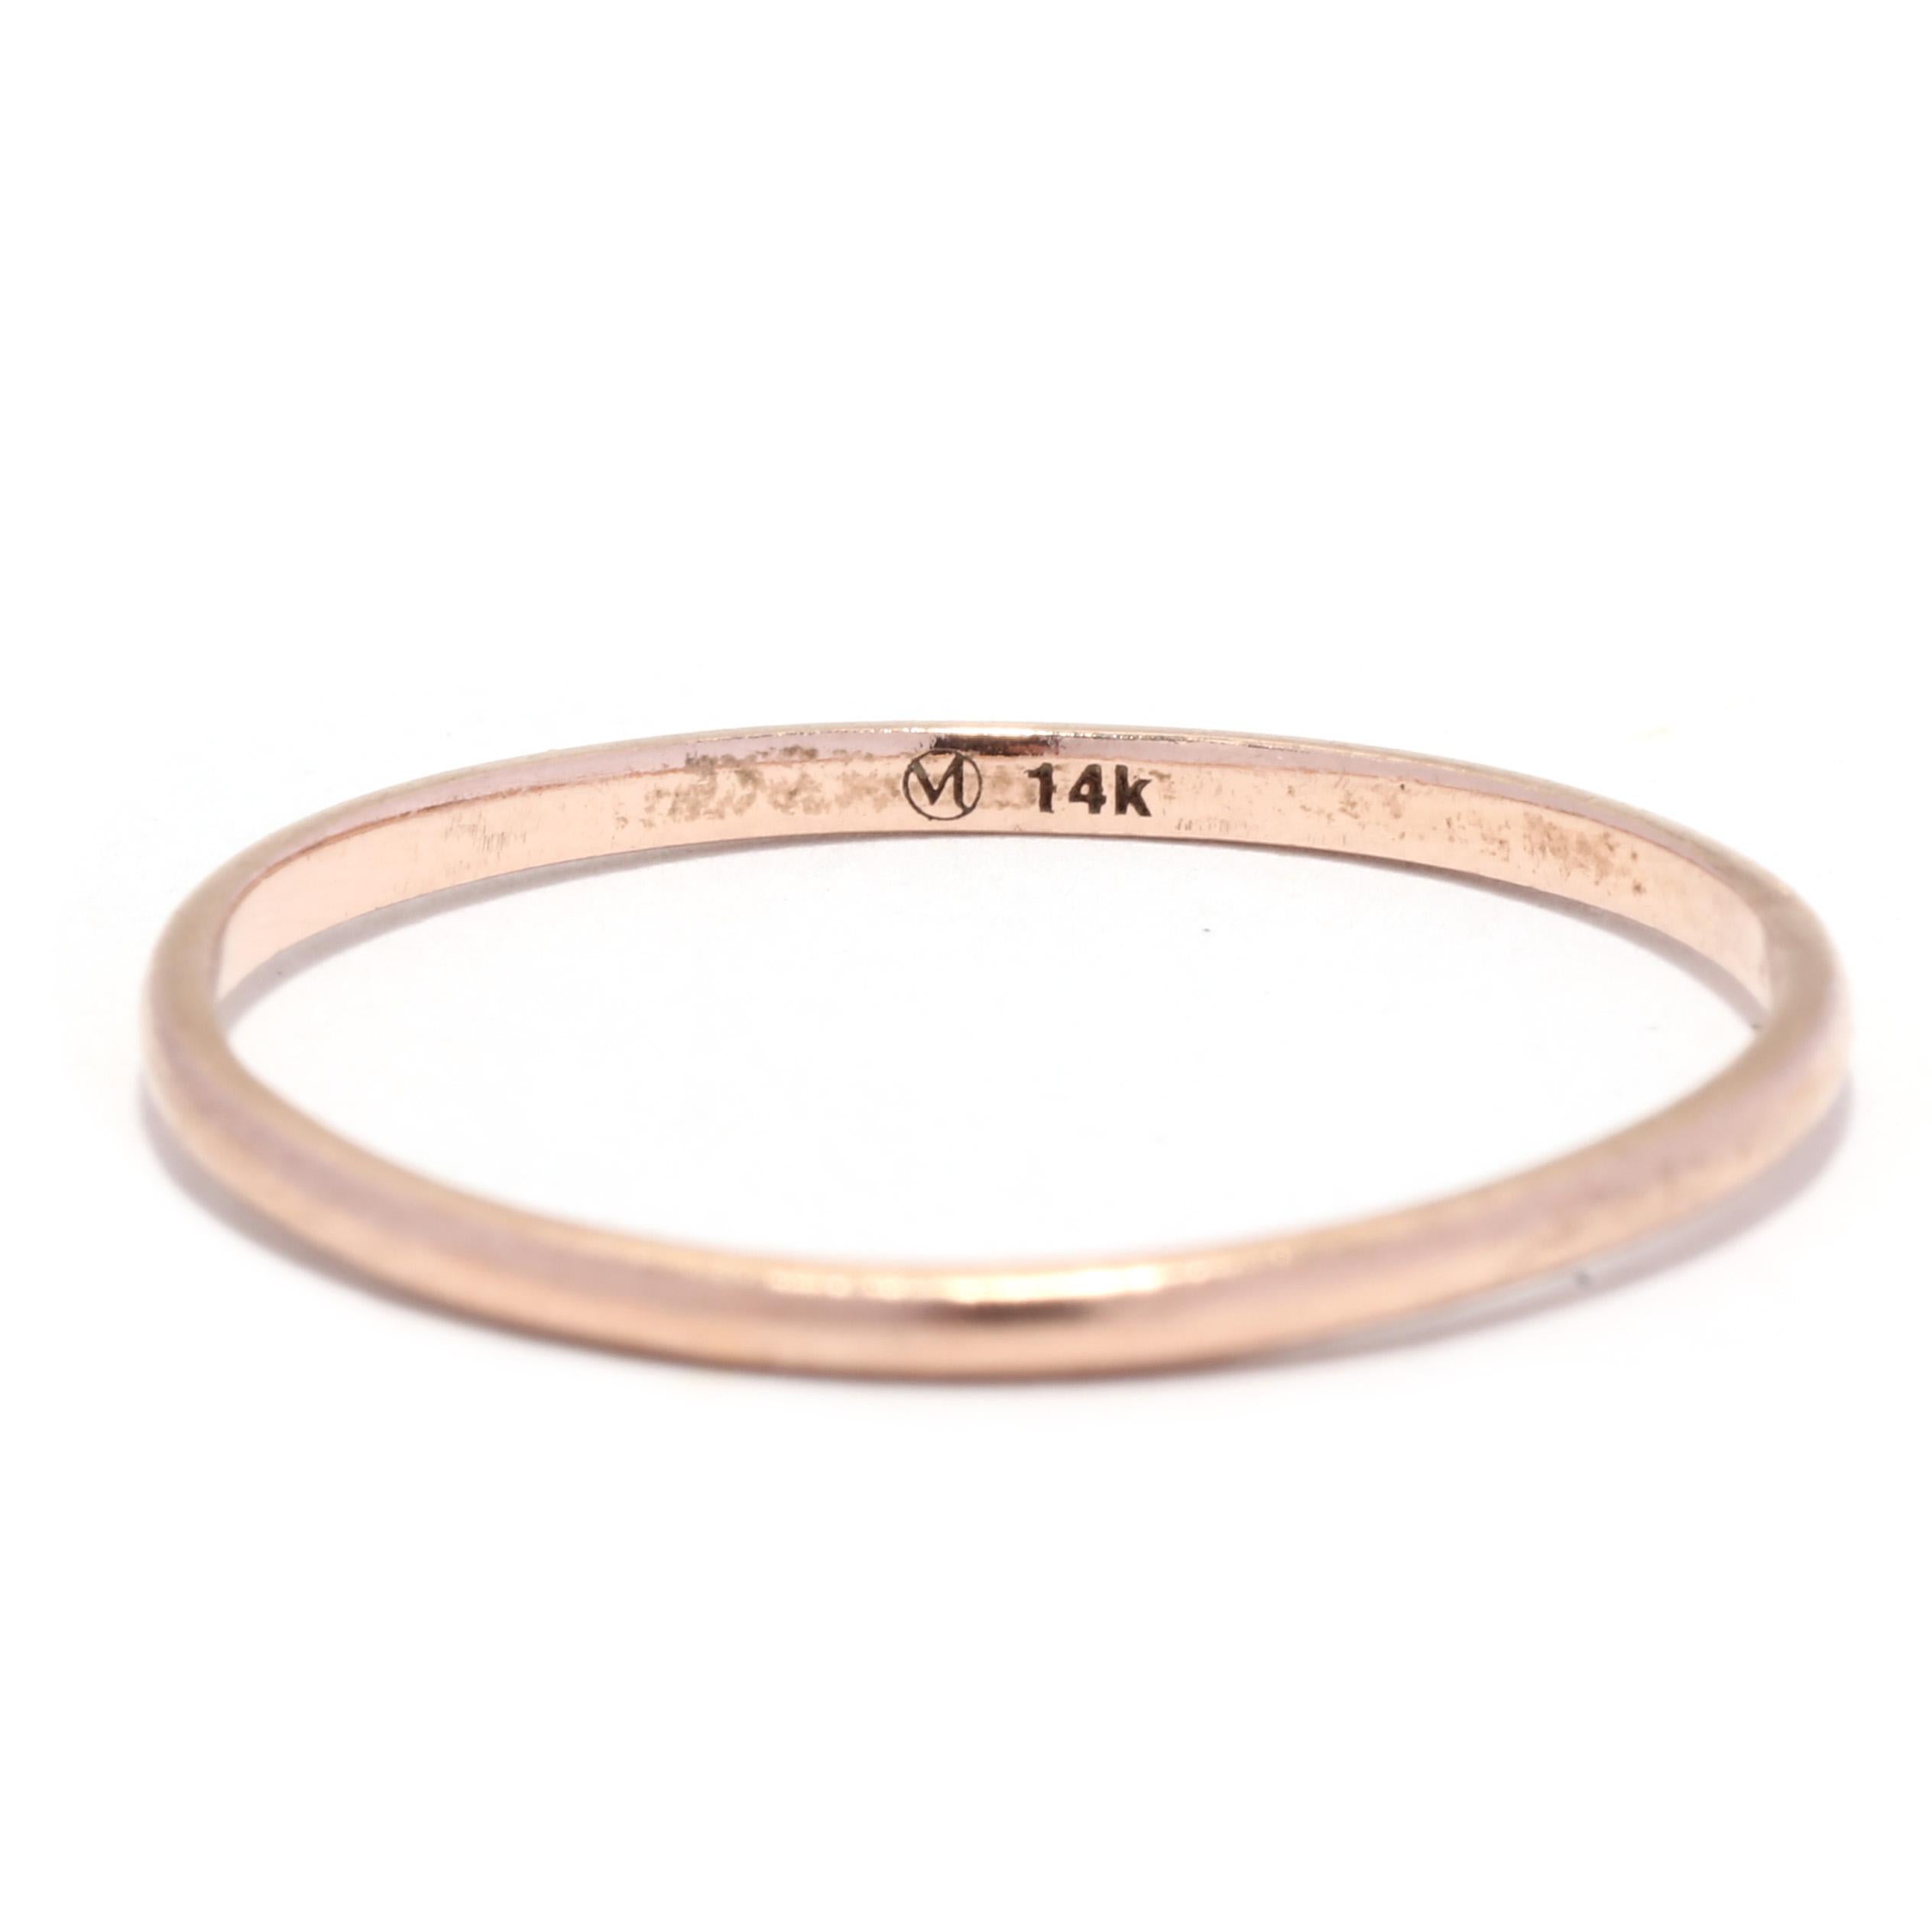 Women's or Men's Skinny Rose Gold Band, 14K Rose Gold, Ring Size 8, Thin Stackable Band